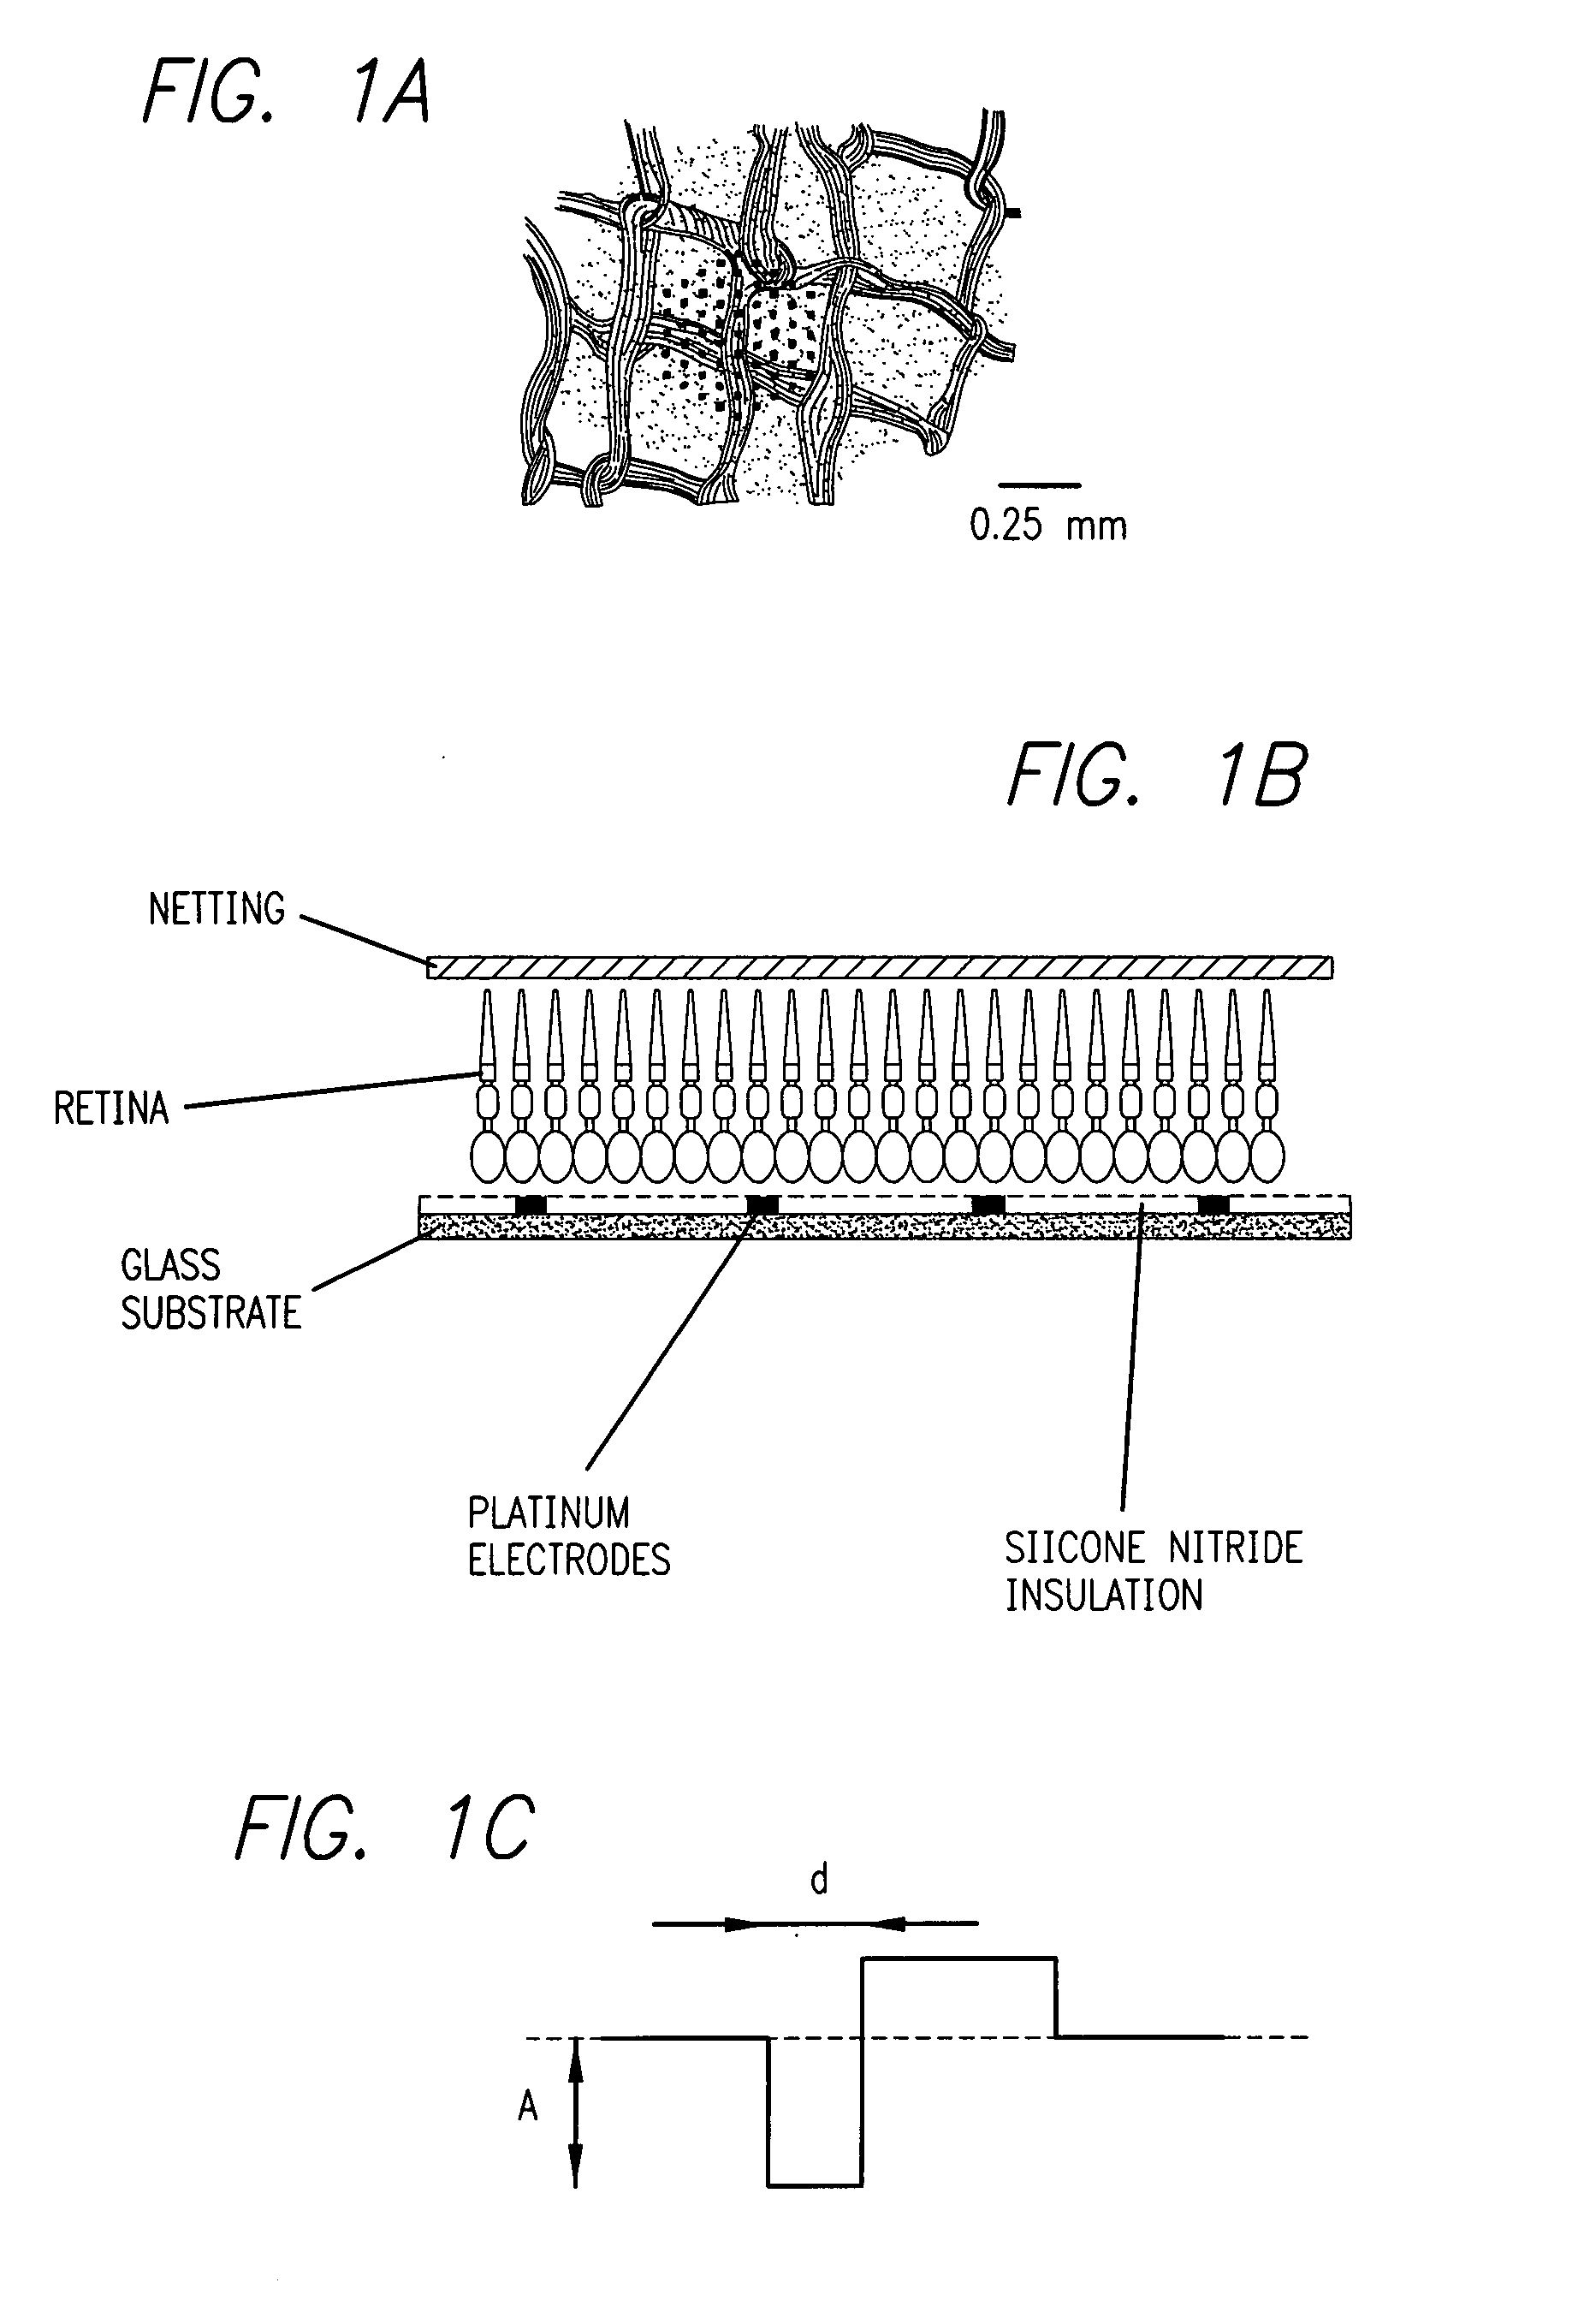 Method and apparatus for visual neural stimulation